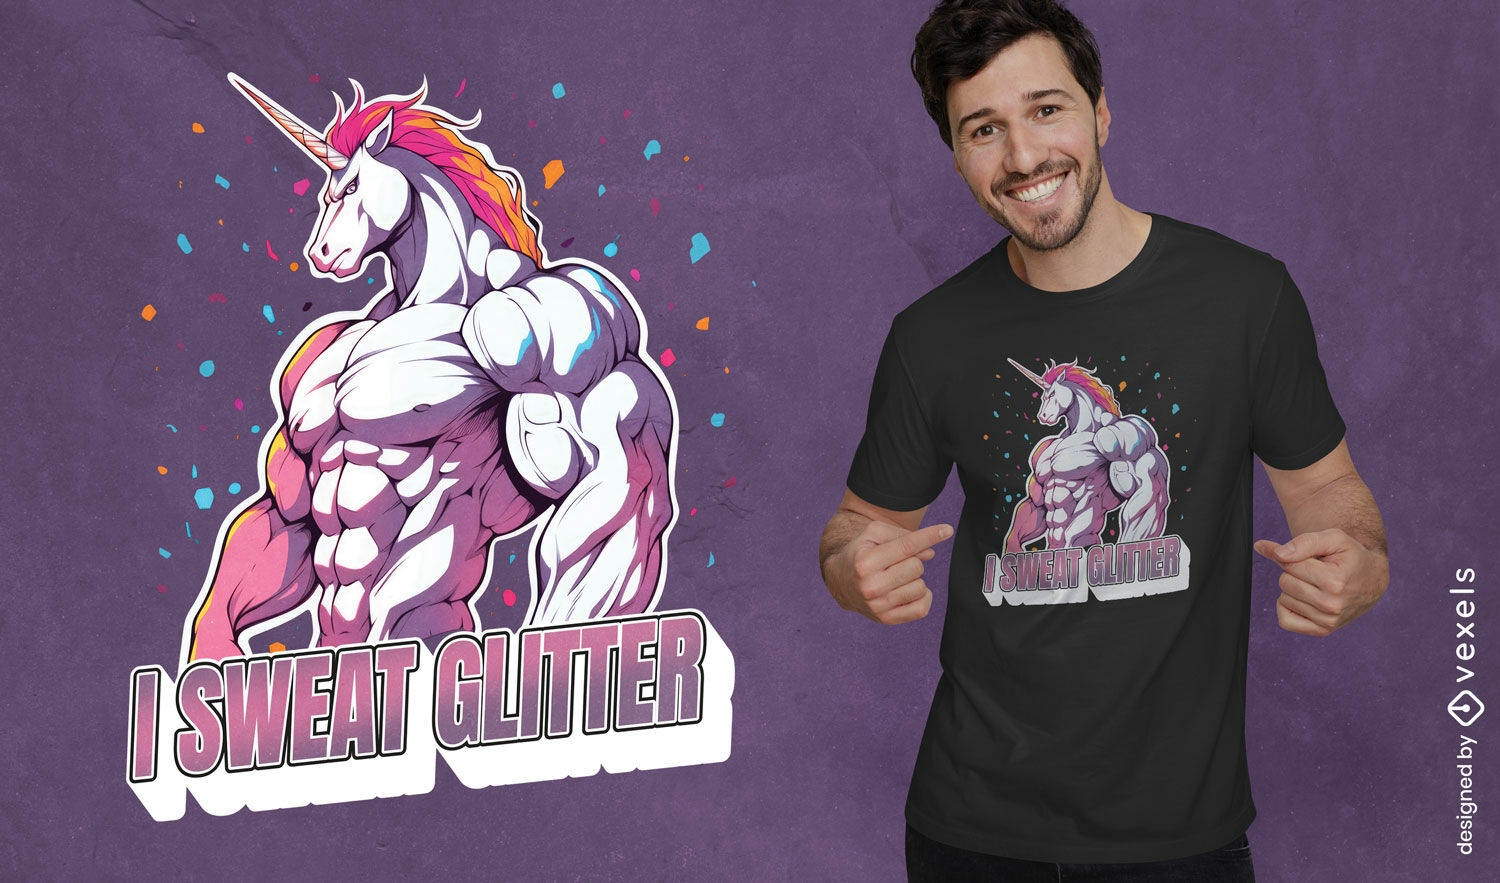 Strong unicorn with muscles t-shirt design